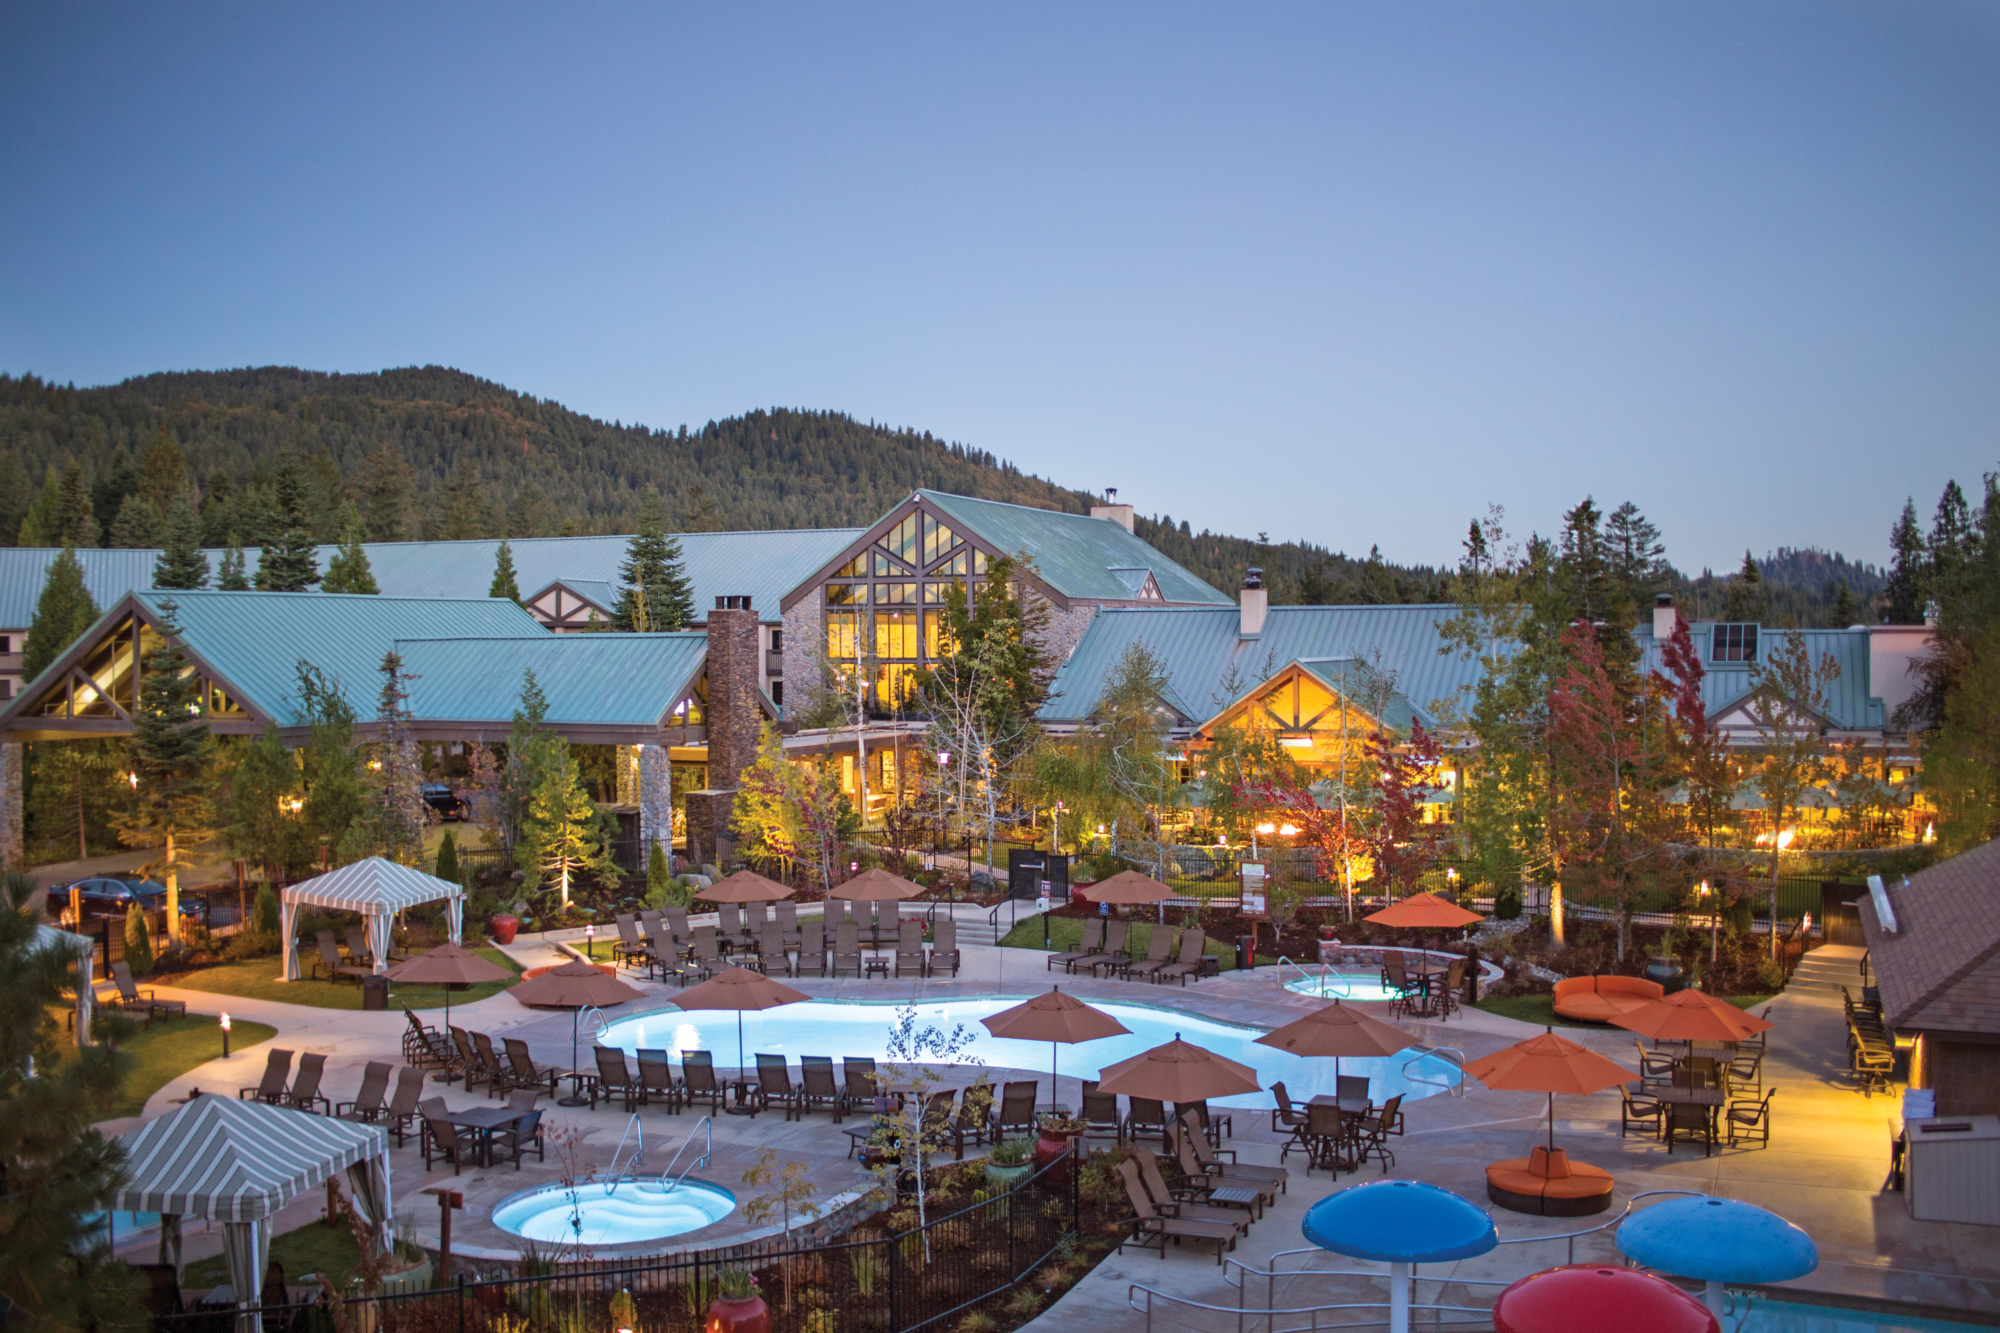 The Tenaya resort with a pool surrounded by umbrellas at dusk.